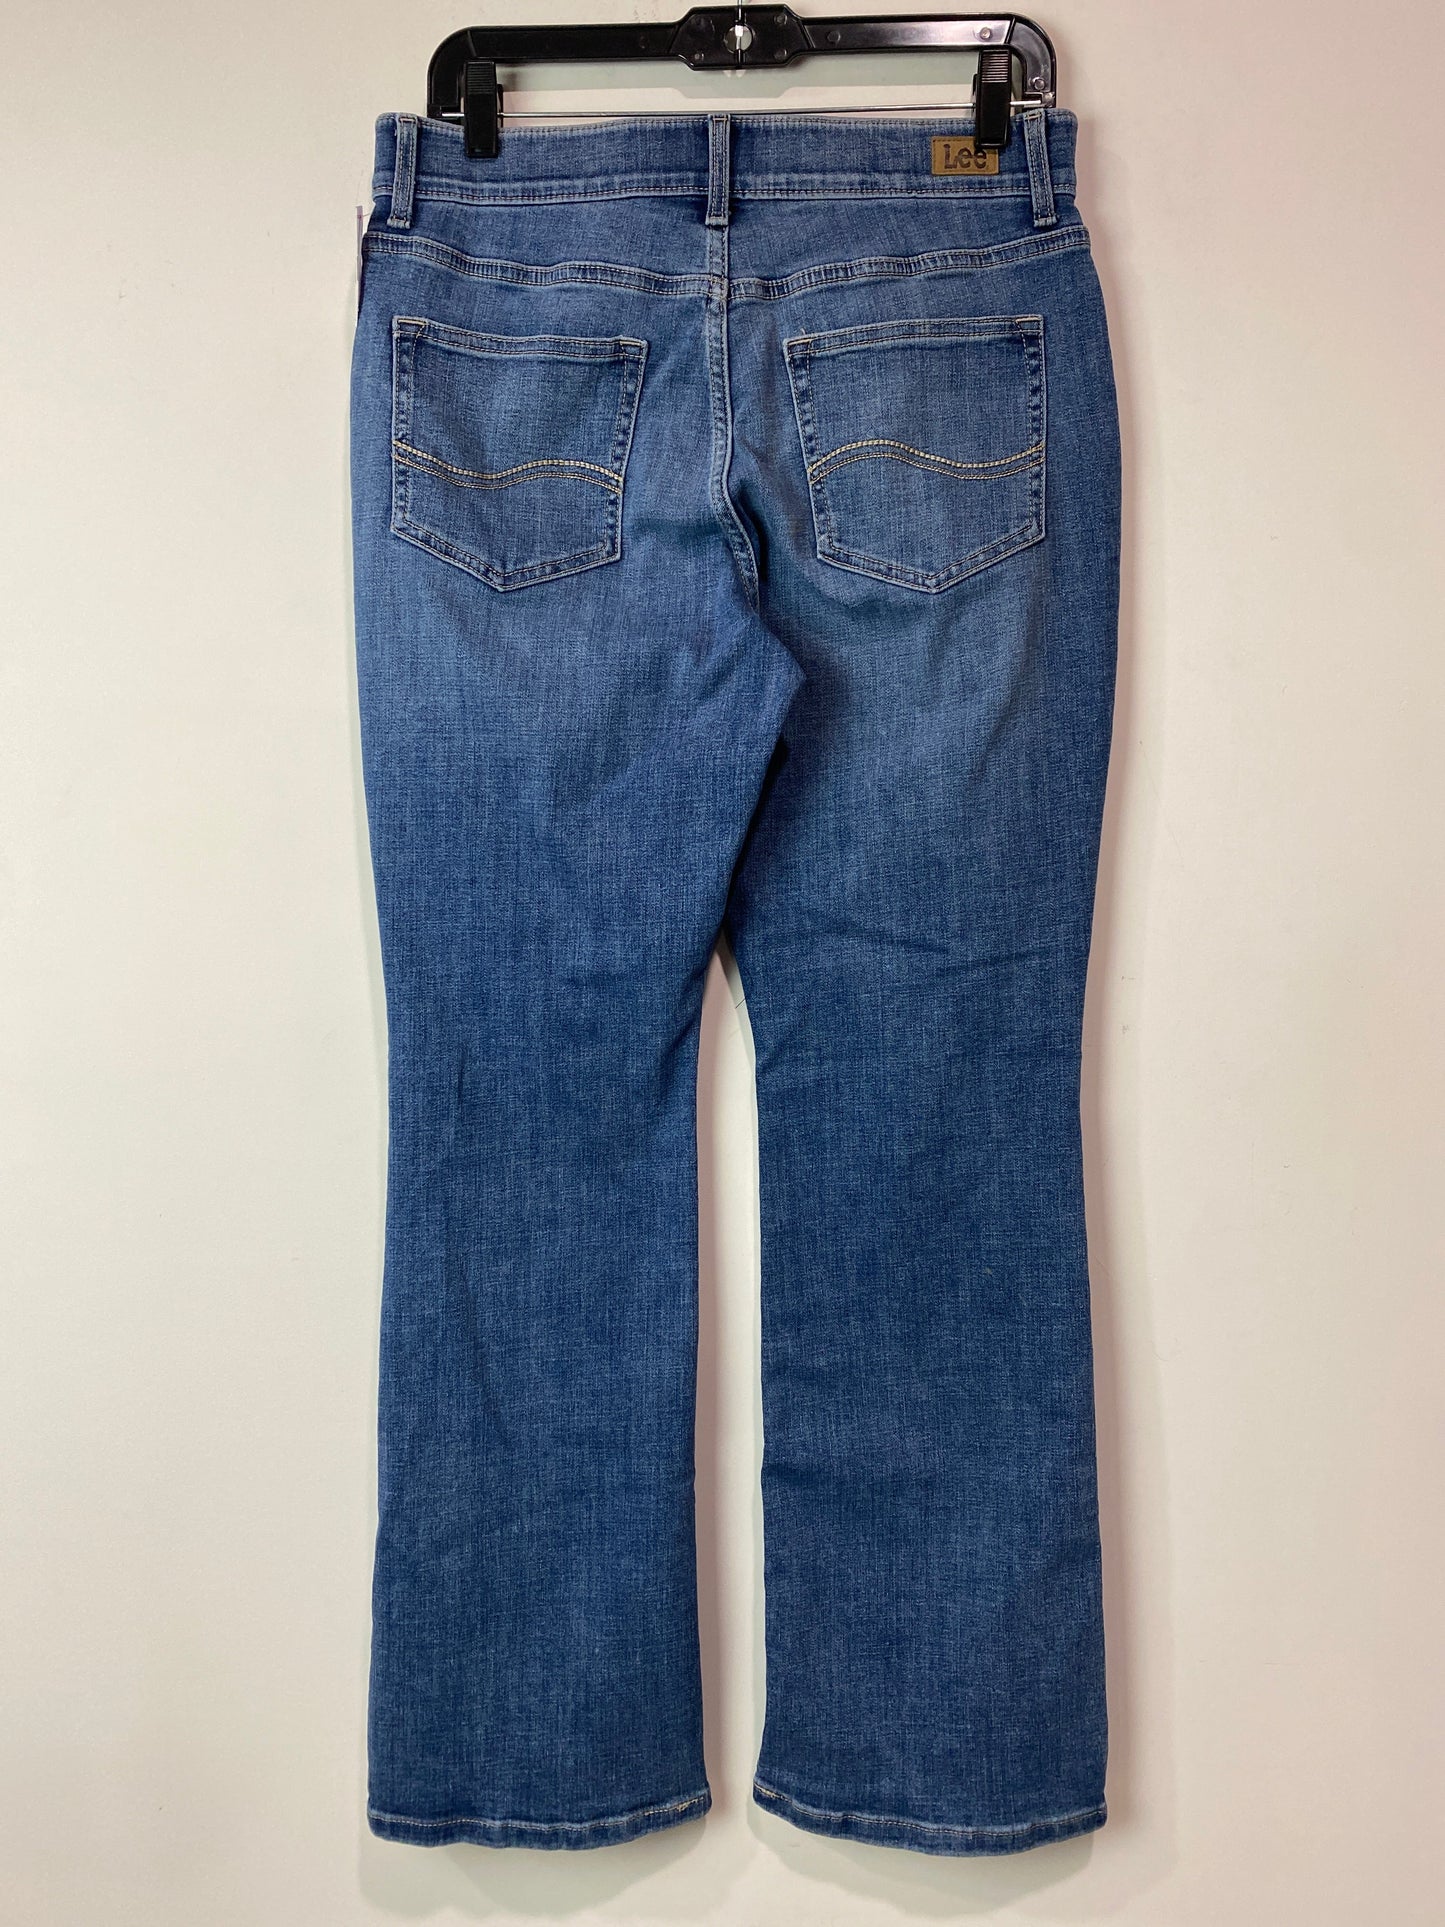 Jeans Boot Cut By Lee  Size: 10